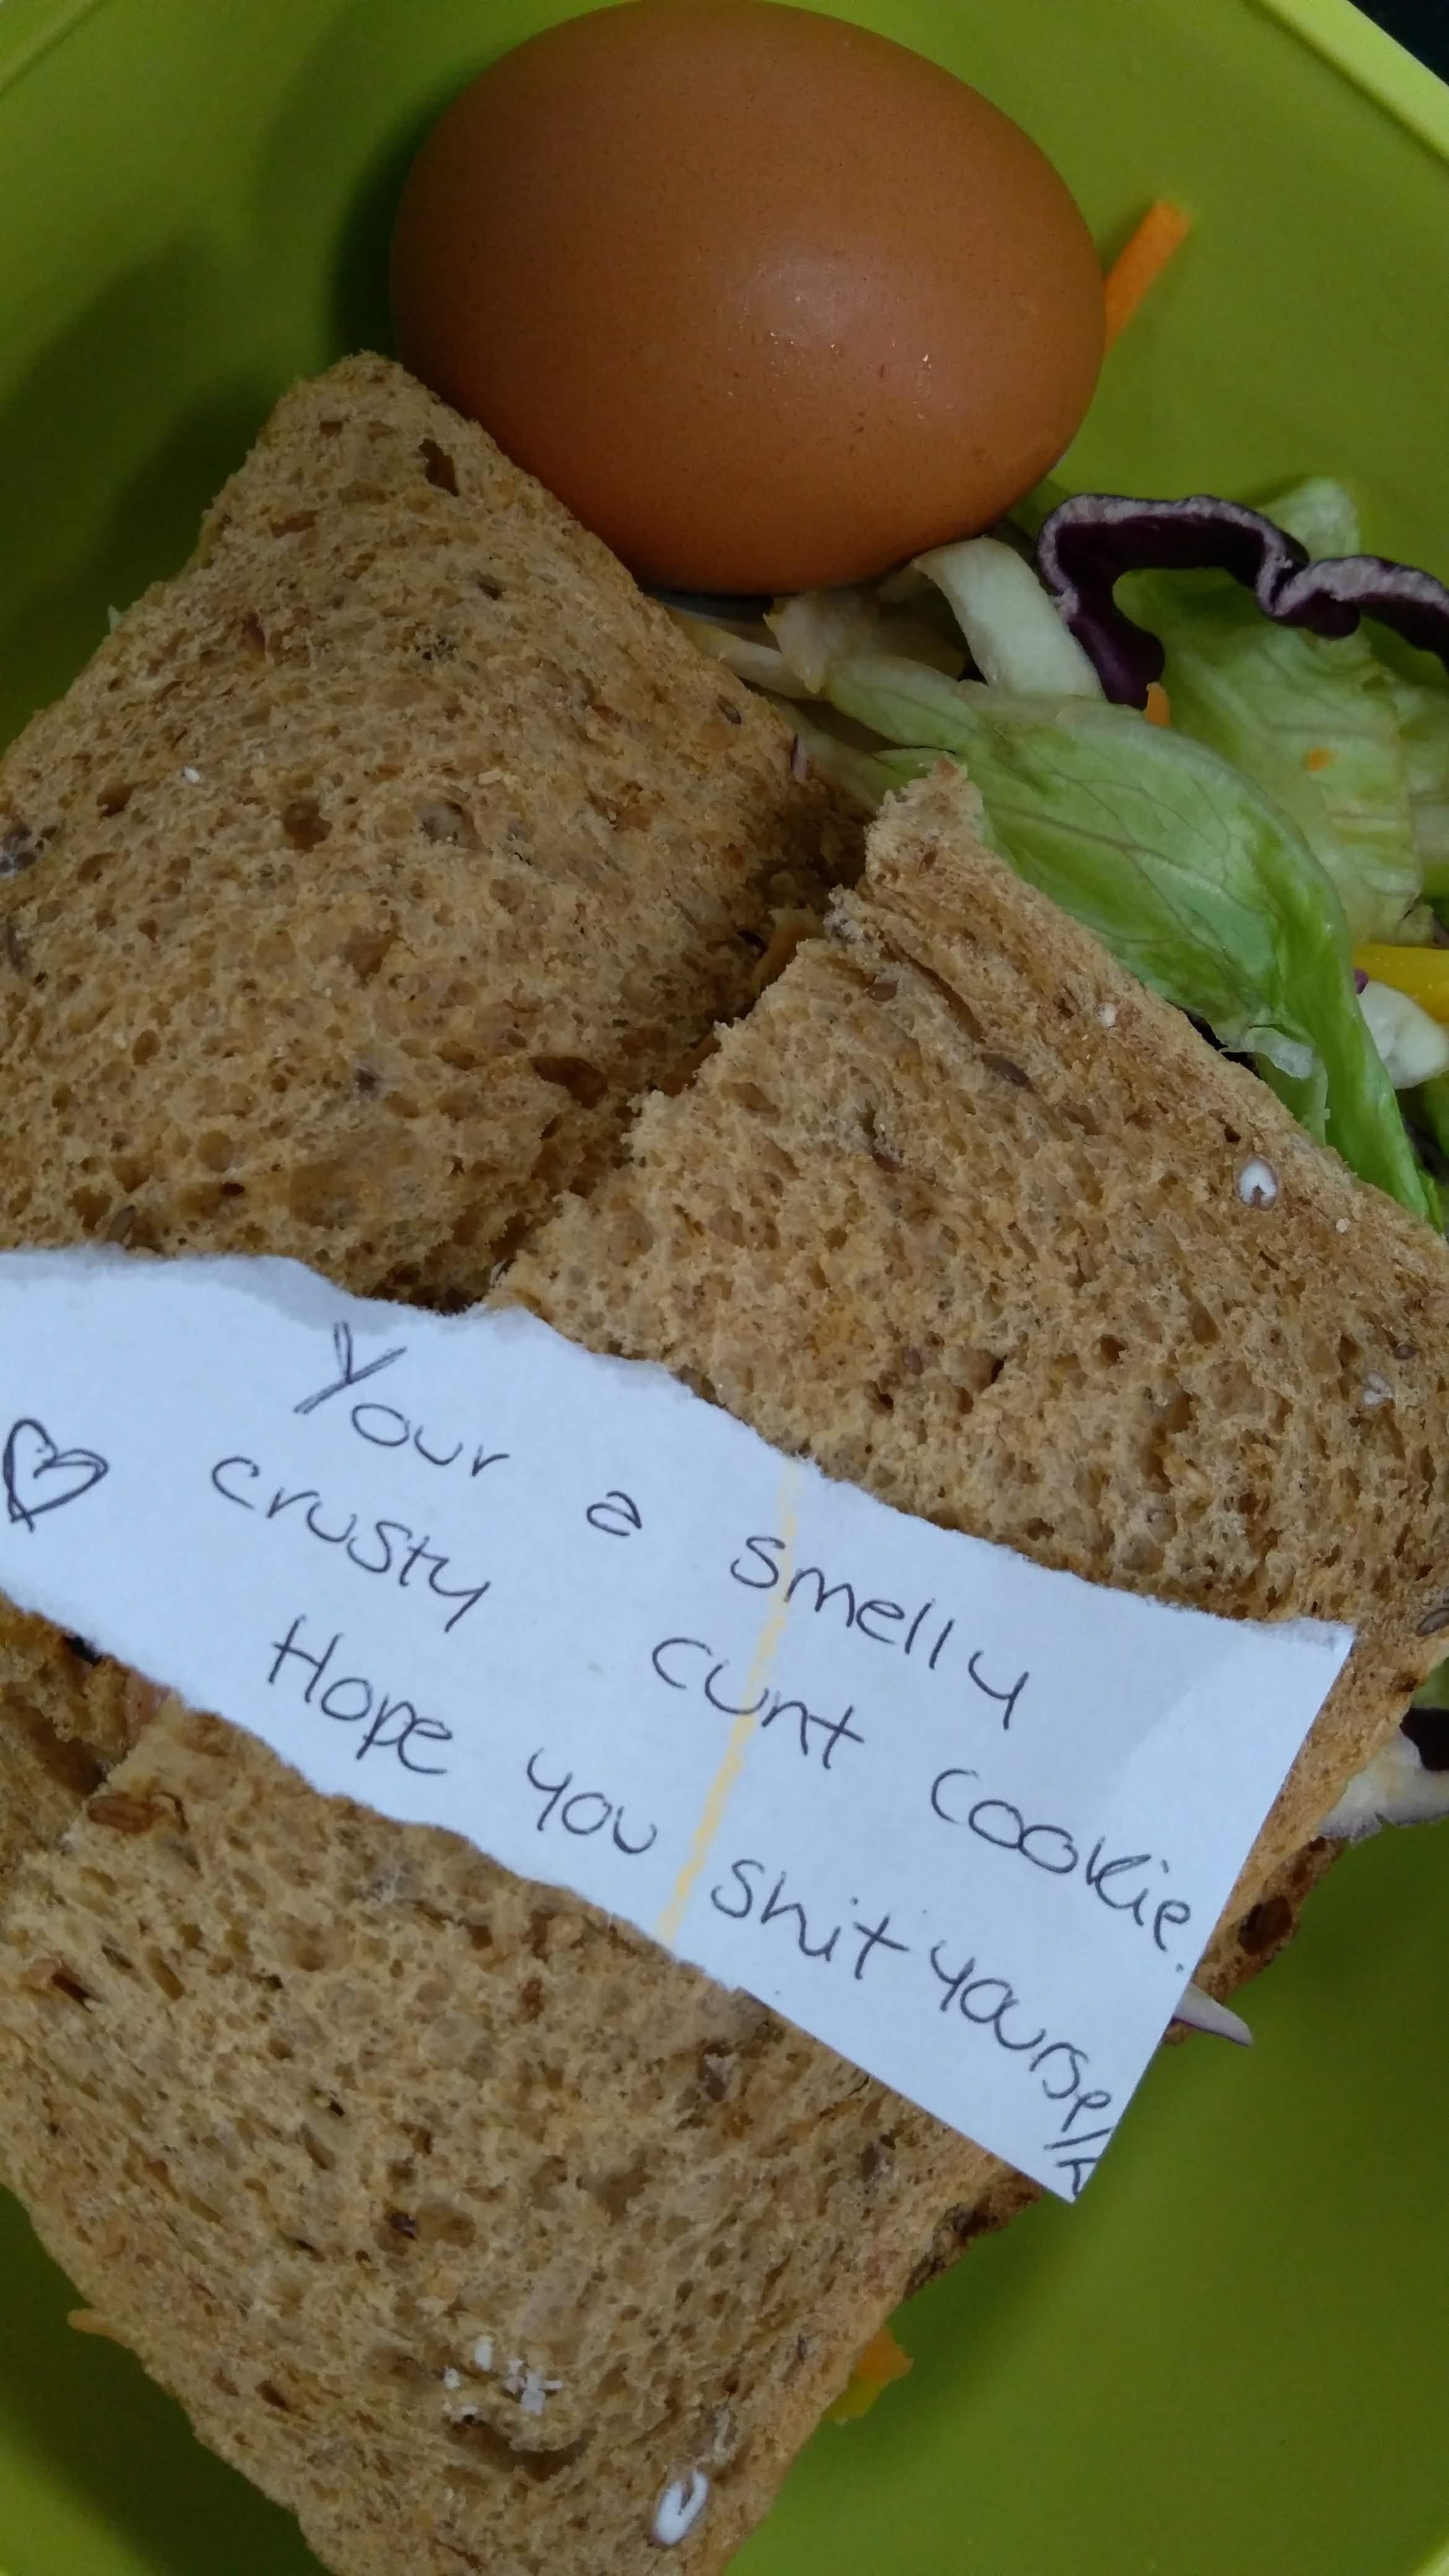 I asked my wife to put abusive notes in my lunchbox instead of the usual soppy love notes. This is day 2